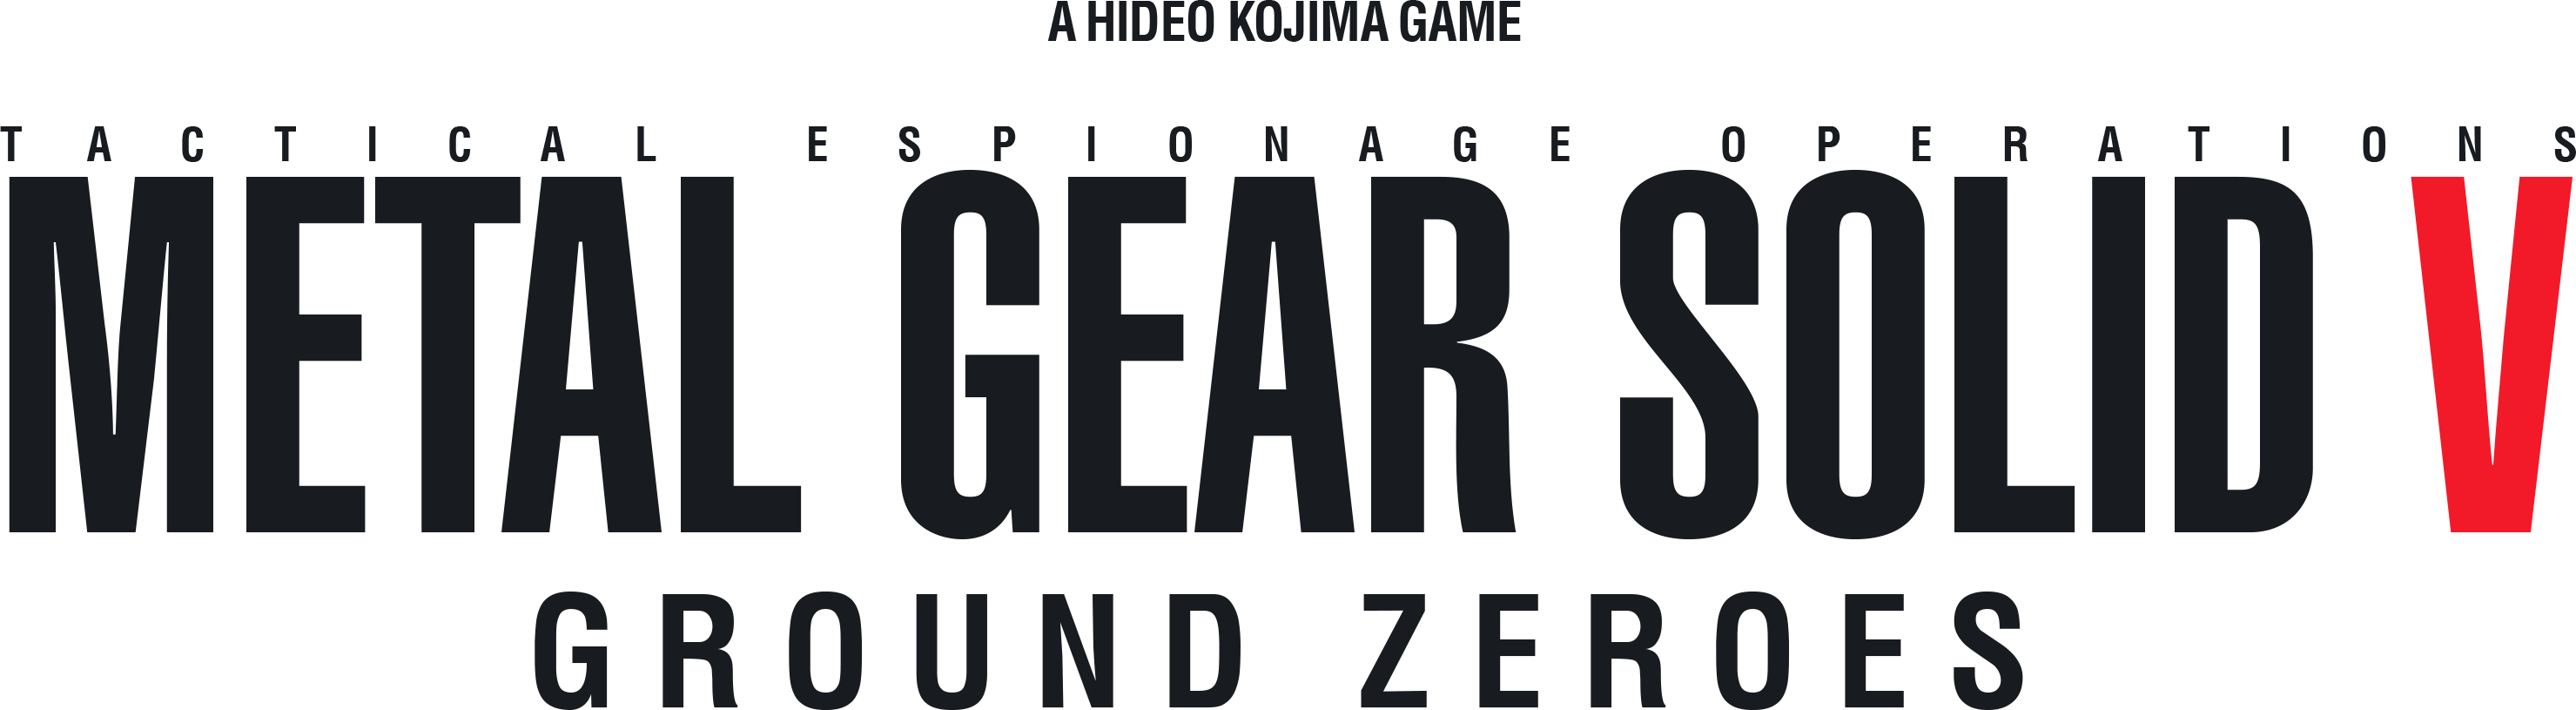 Metal Gear Solid V The Phantom Pain Logo Background PNG